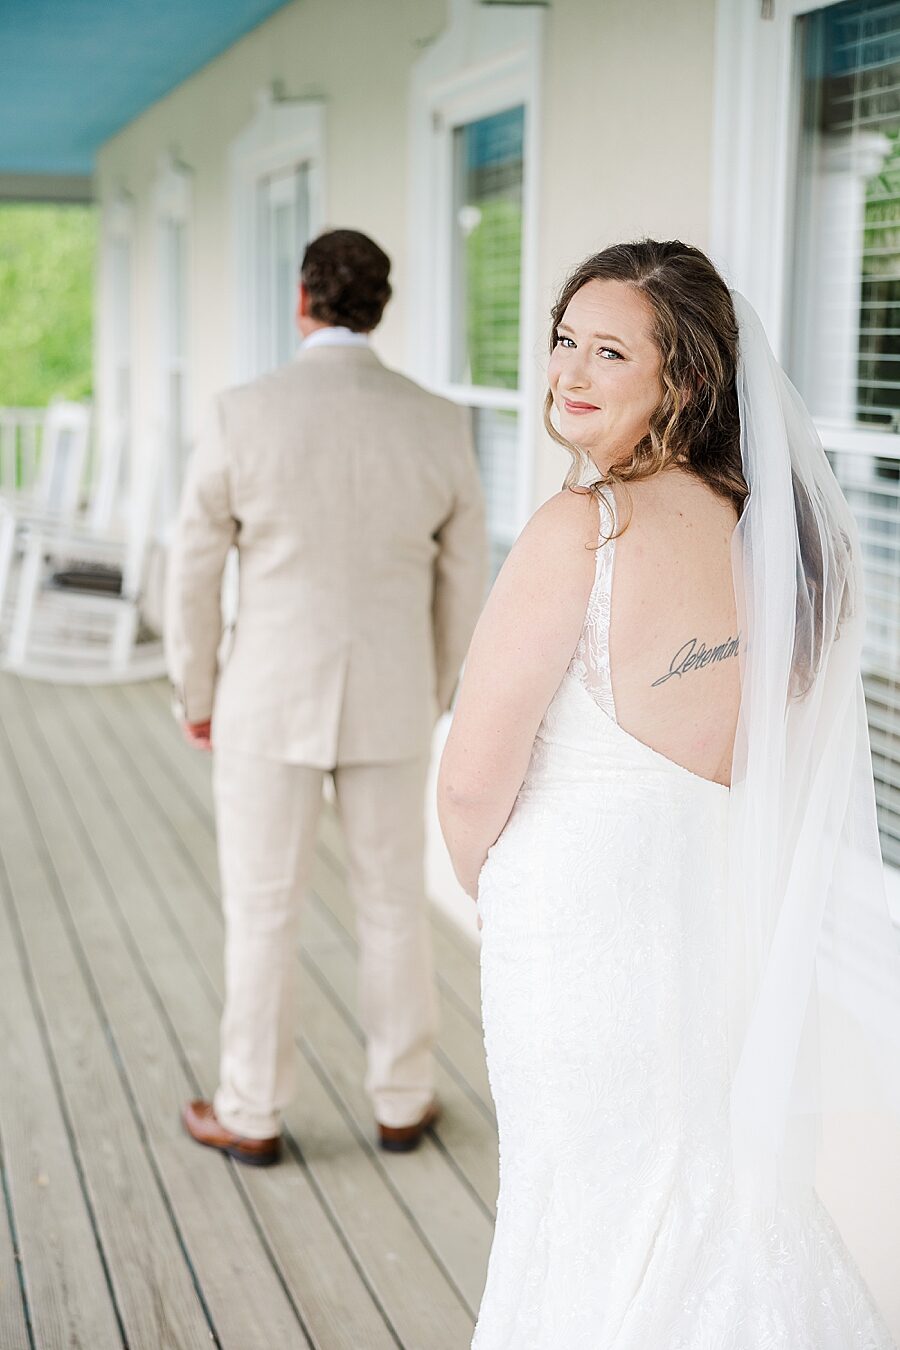 First look with bride and dad at Castleton Farms Wedding with a Rainbow by Amanda May Photos